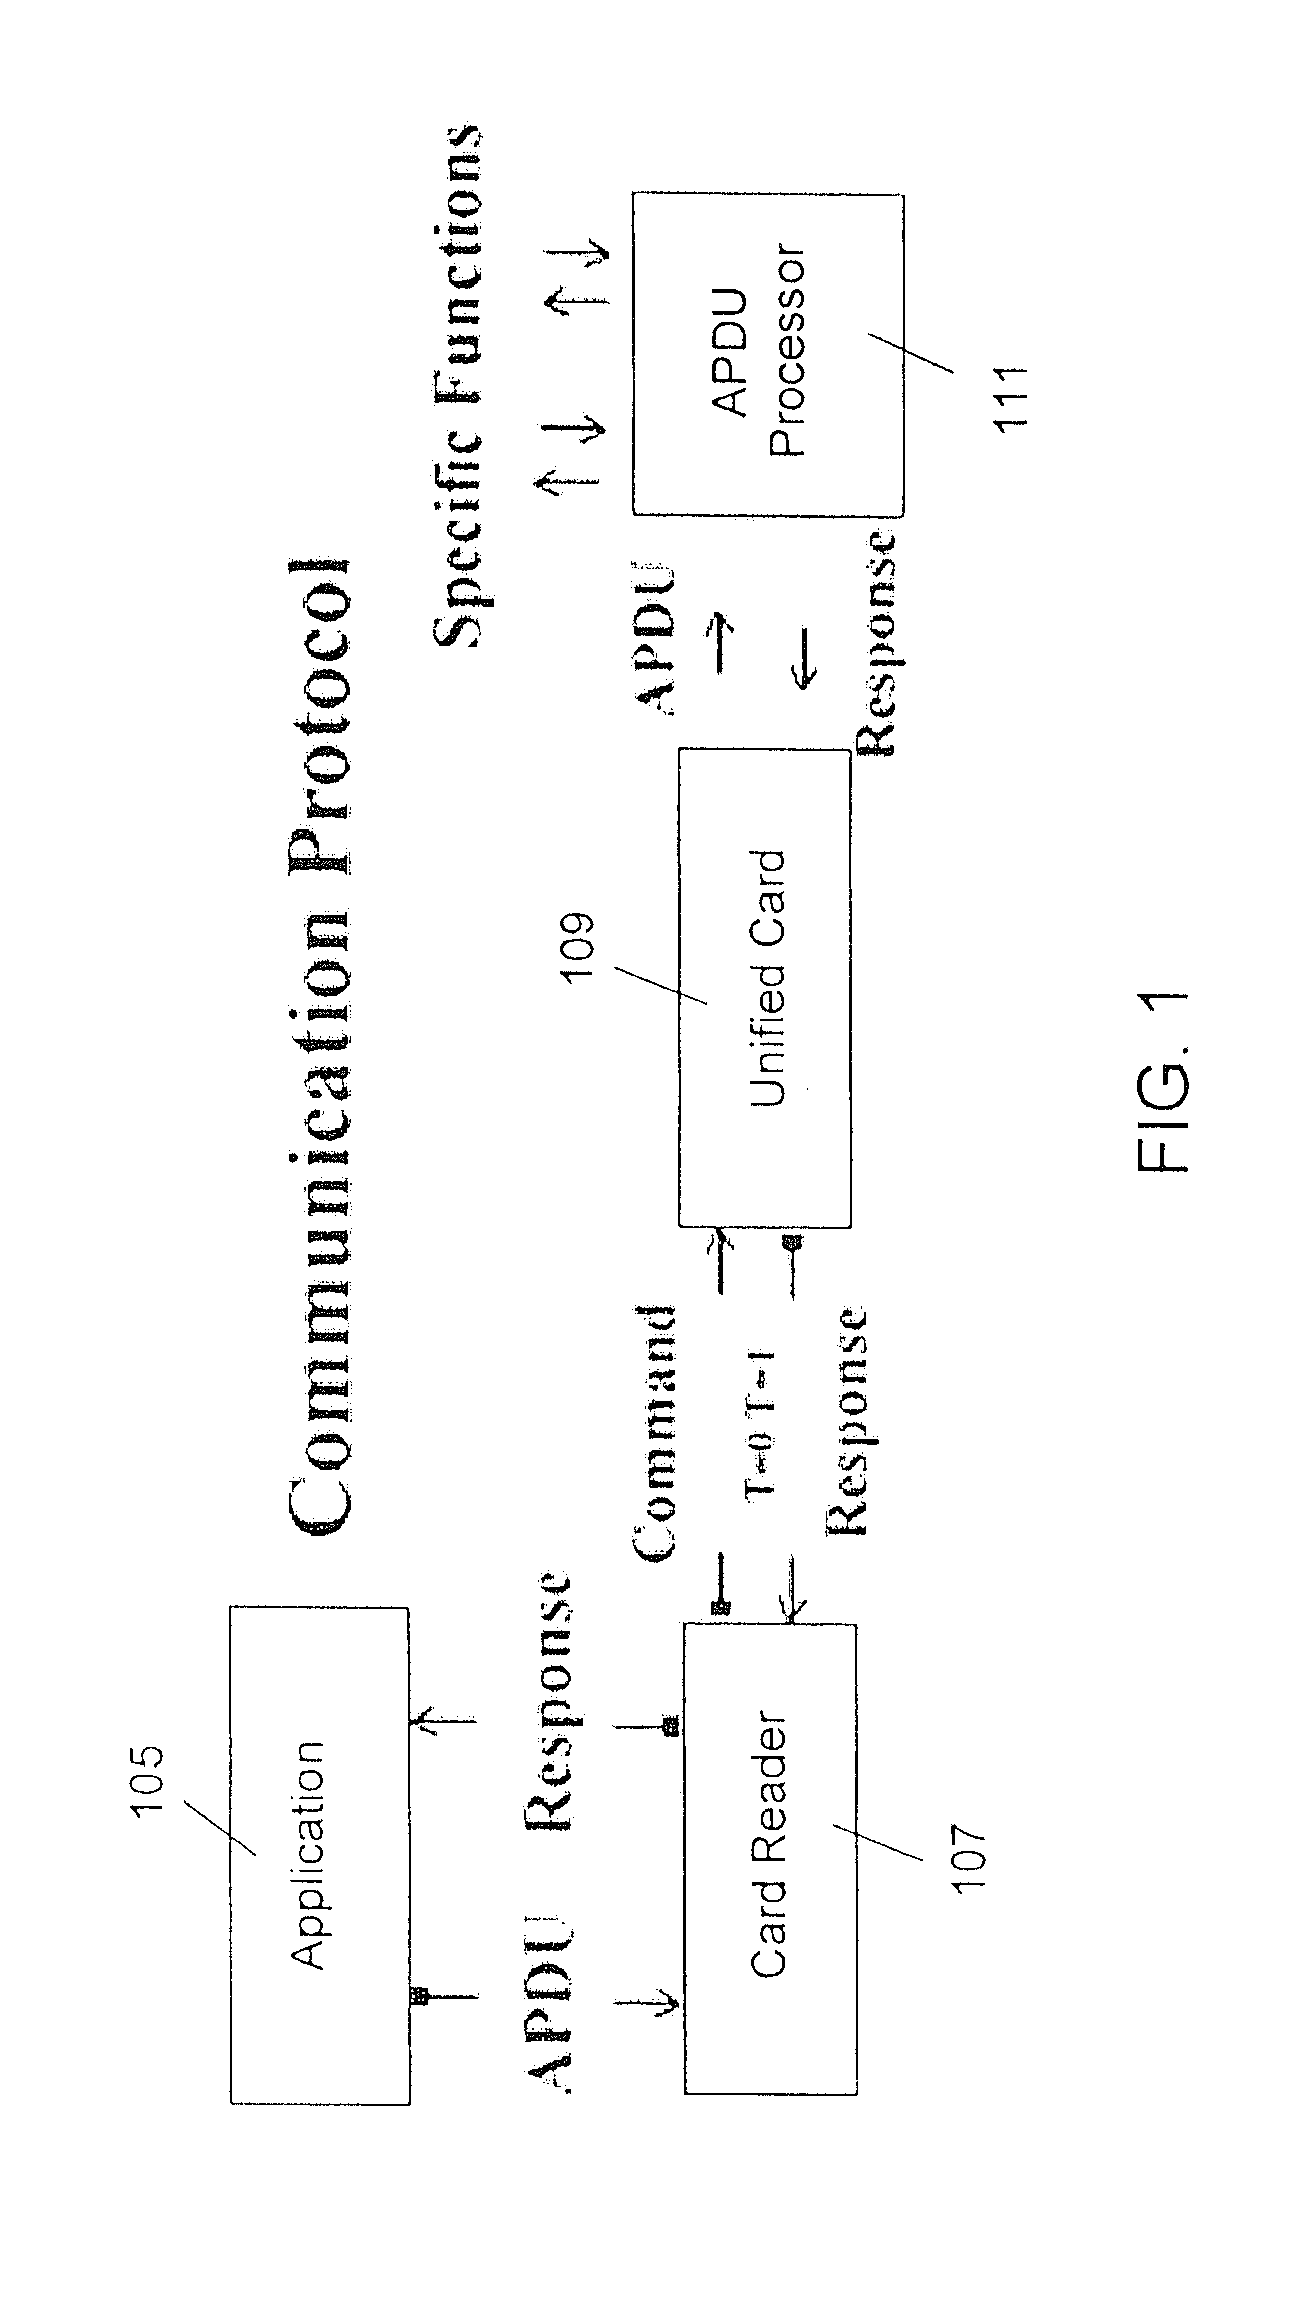 Apparatus and method for storing electronic receipts on a unified card or smartphone